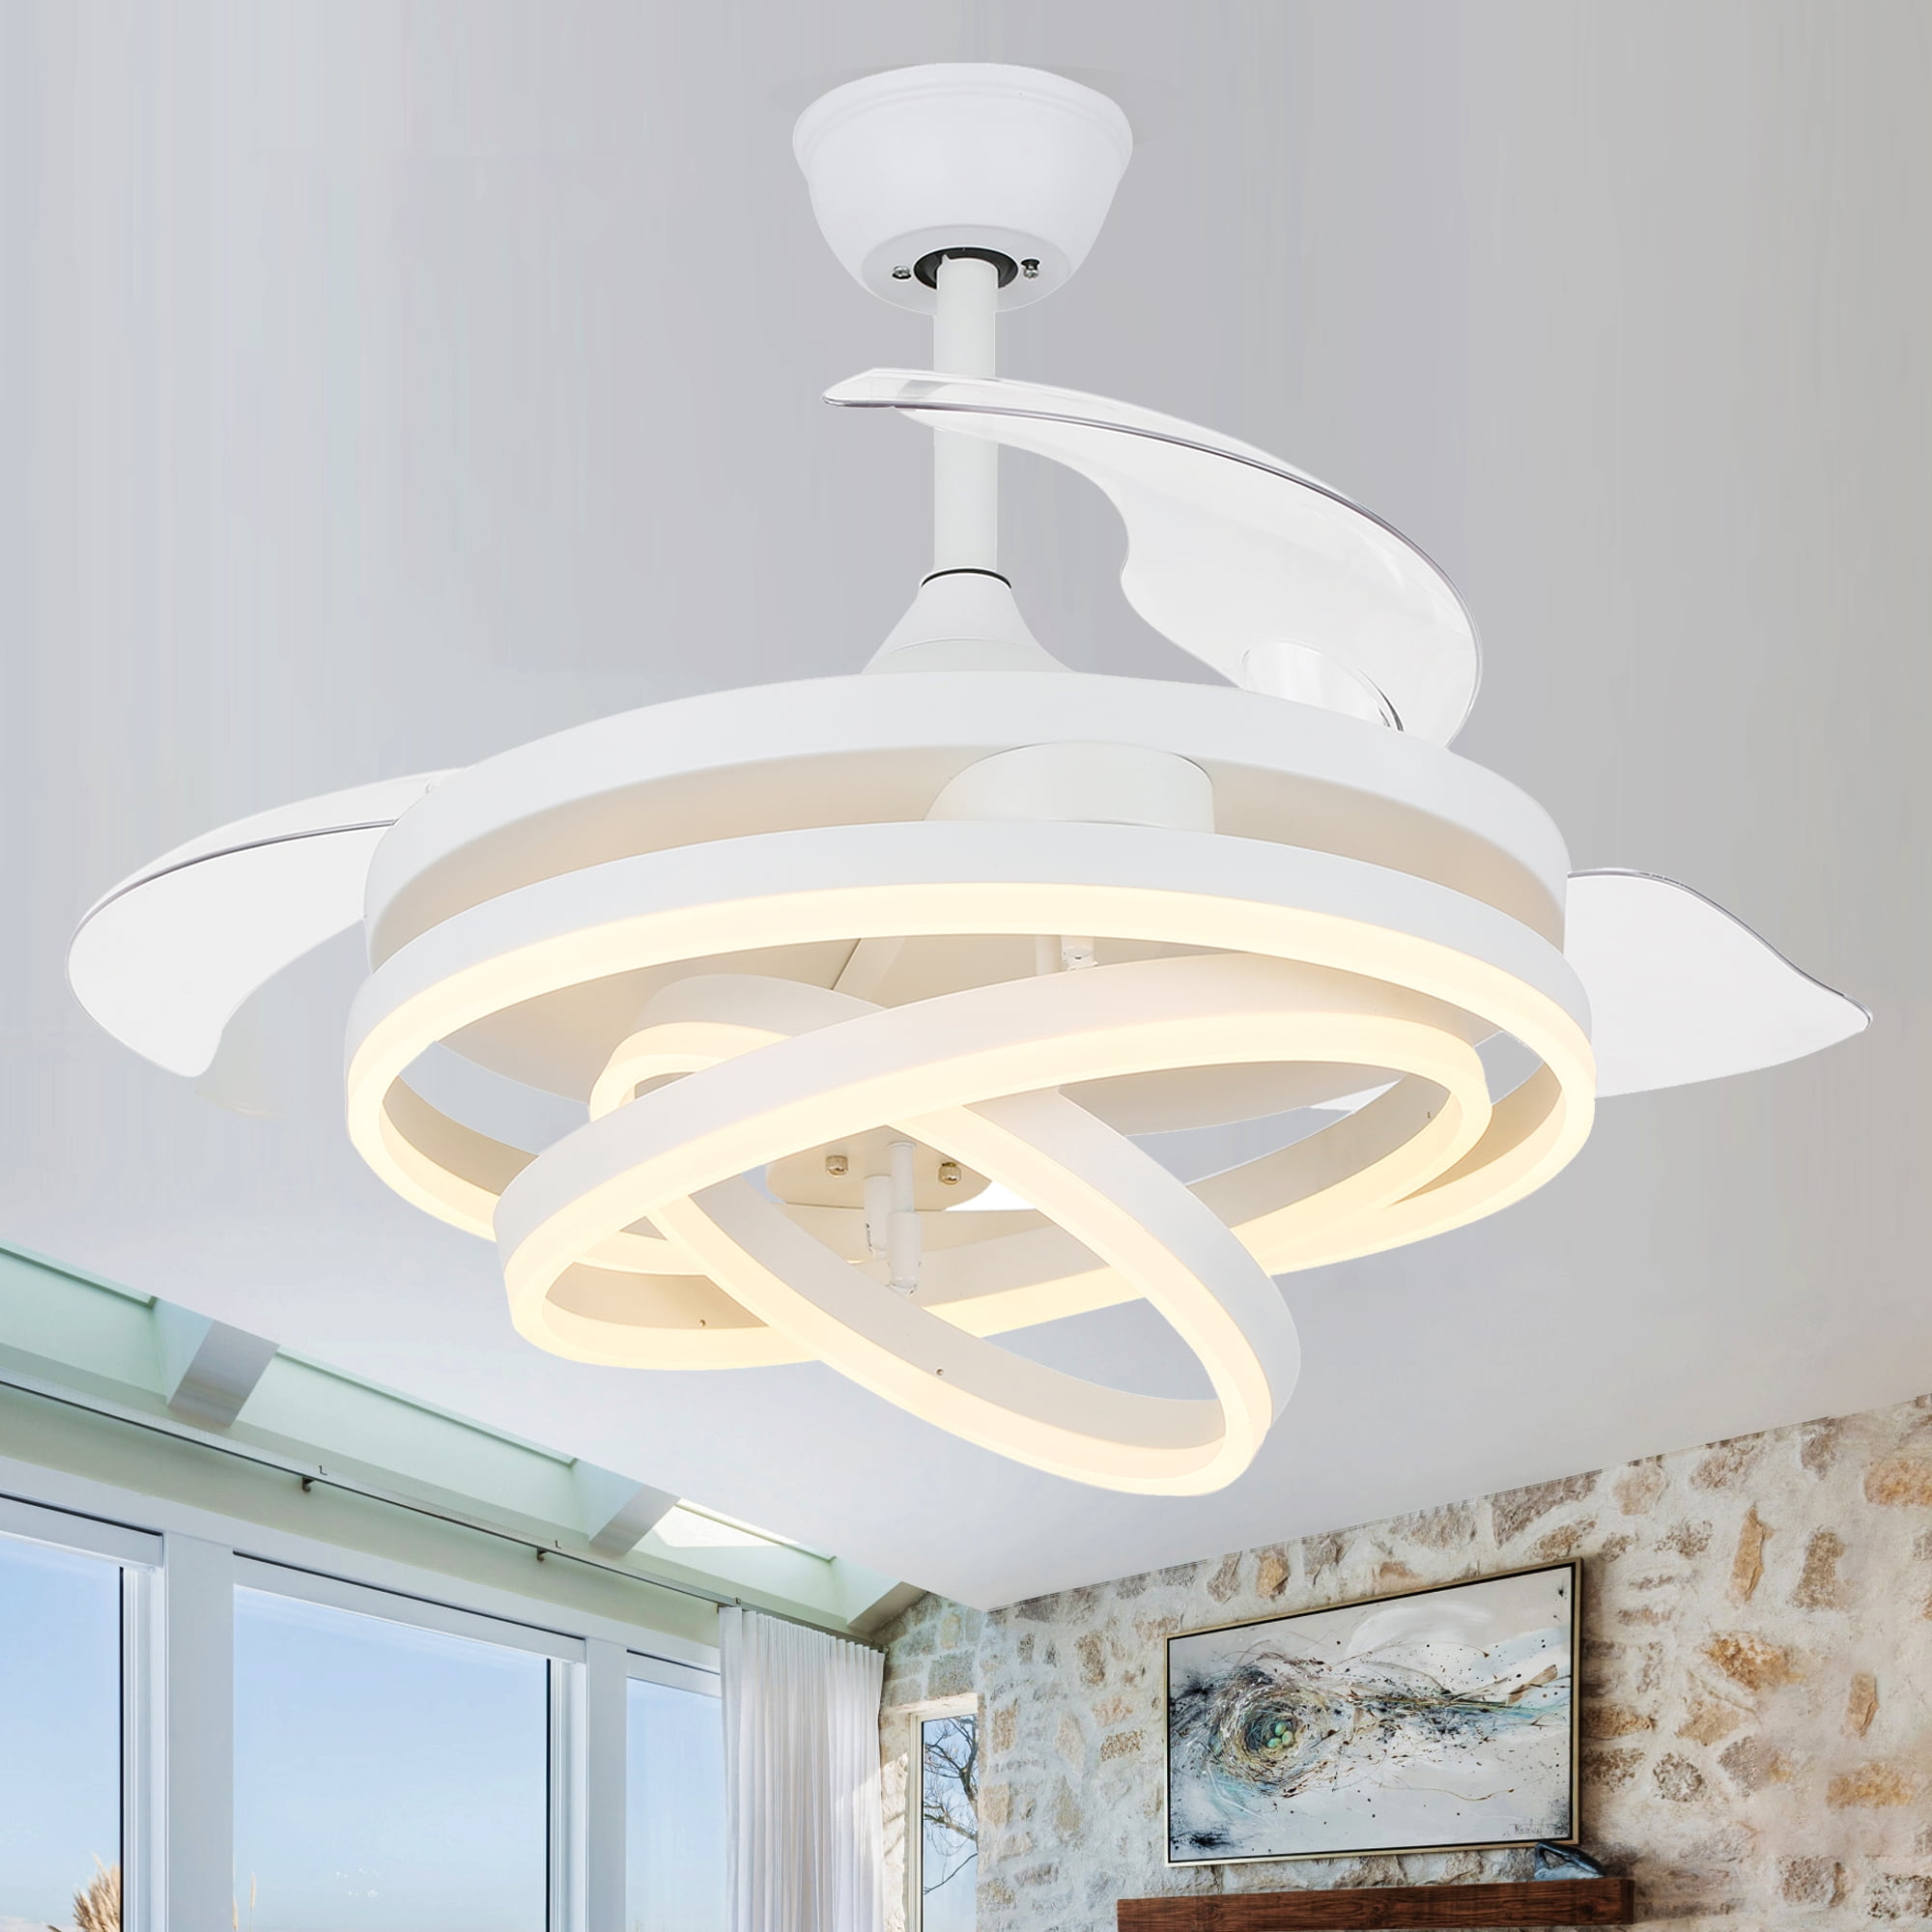 42 White Retractable Ceiling Fan With